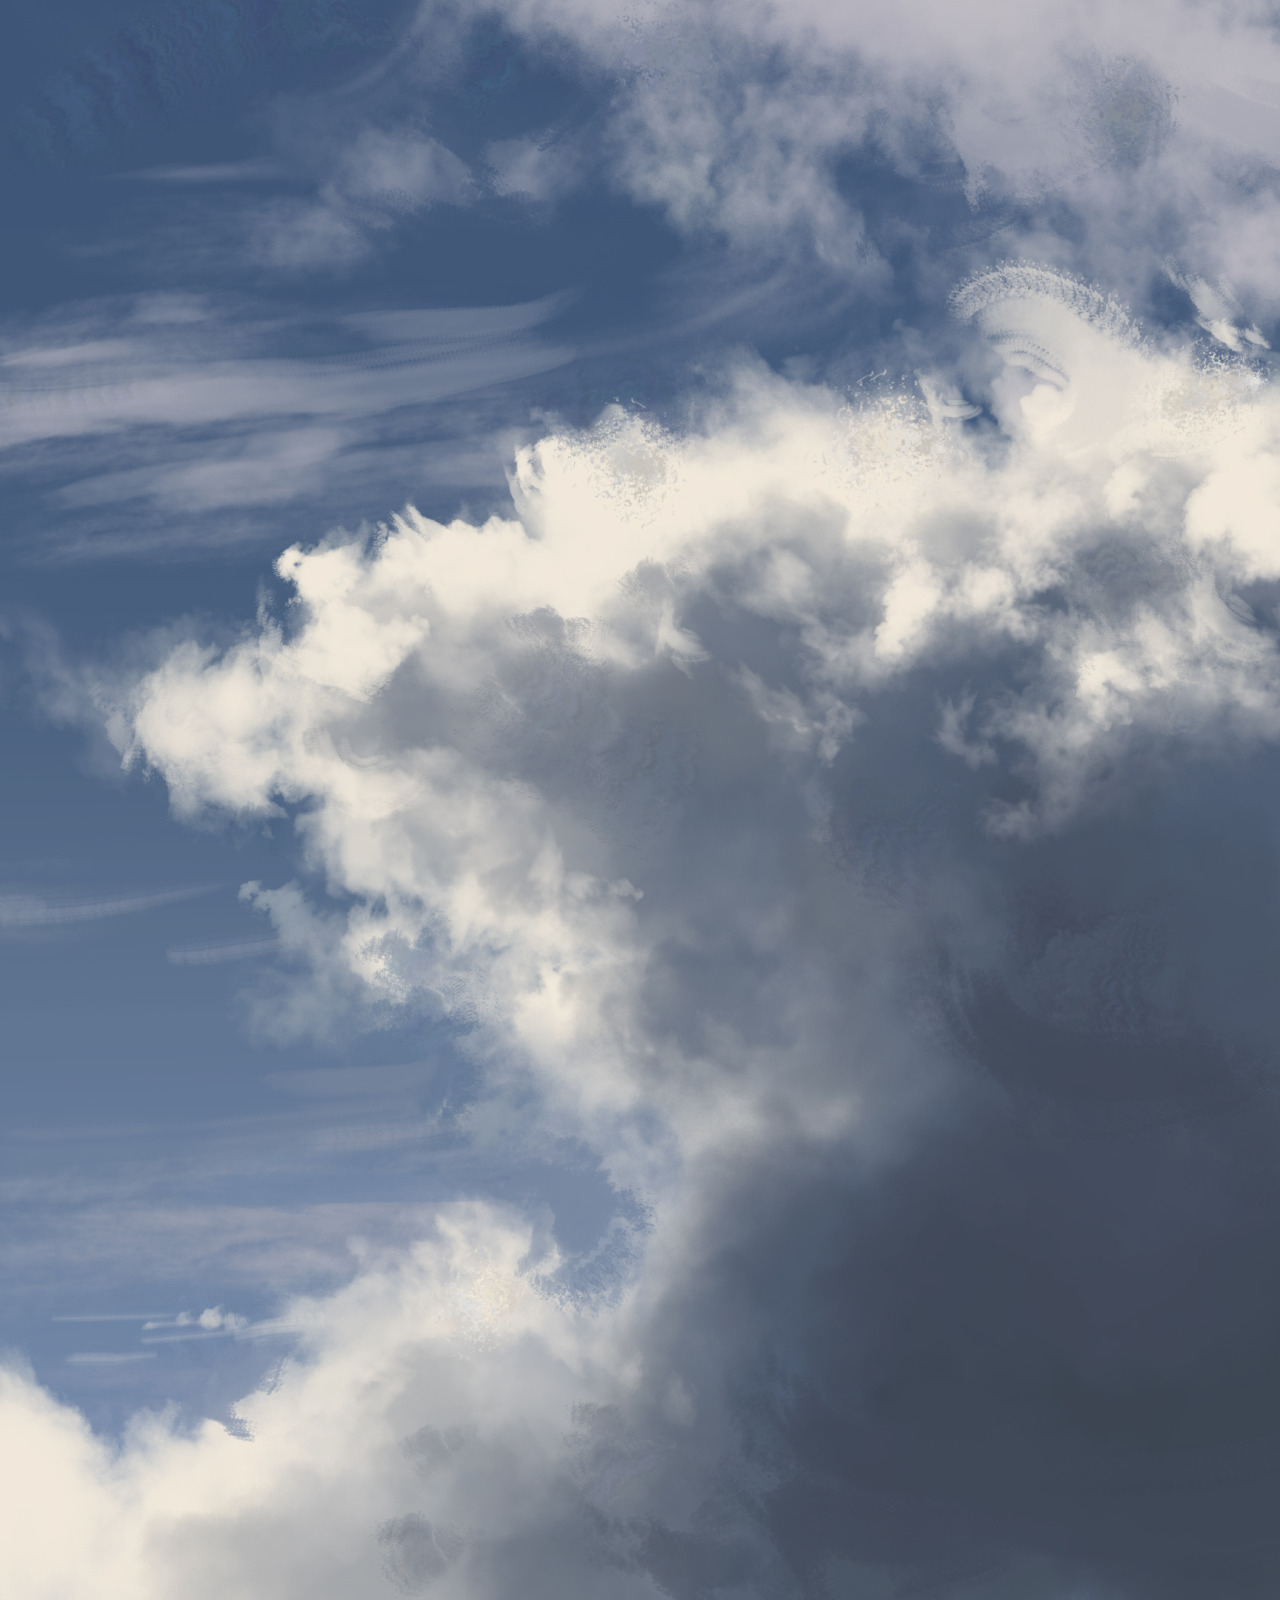 A digital painting of a blue and white cloudy sky